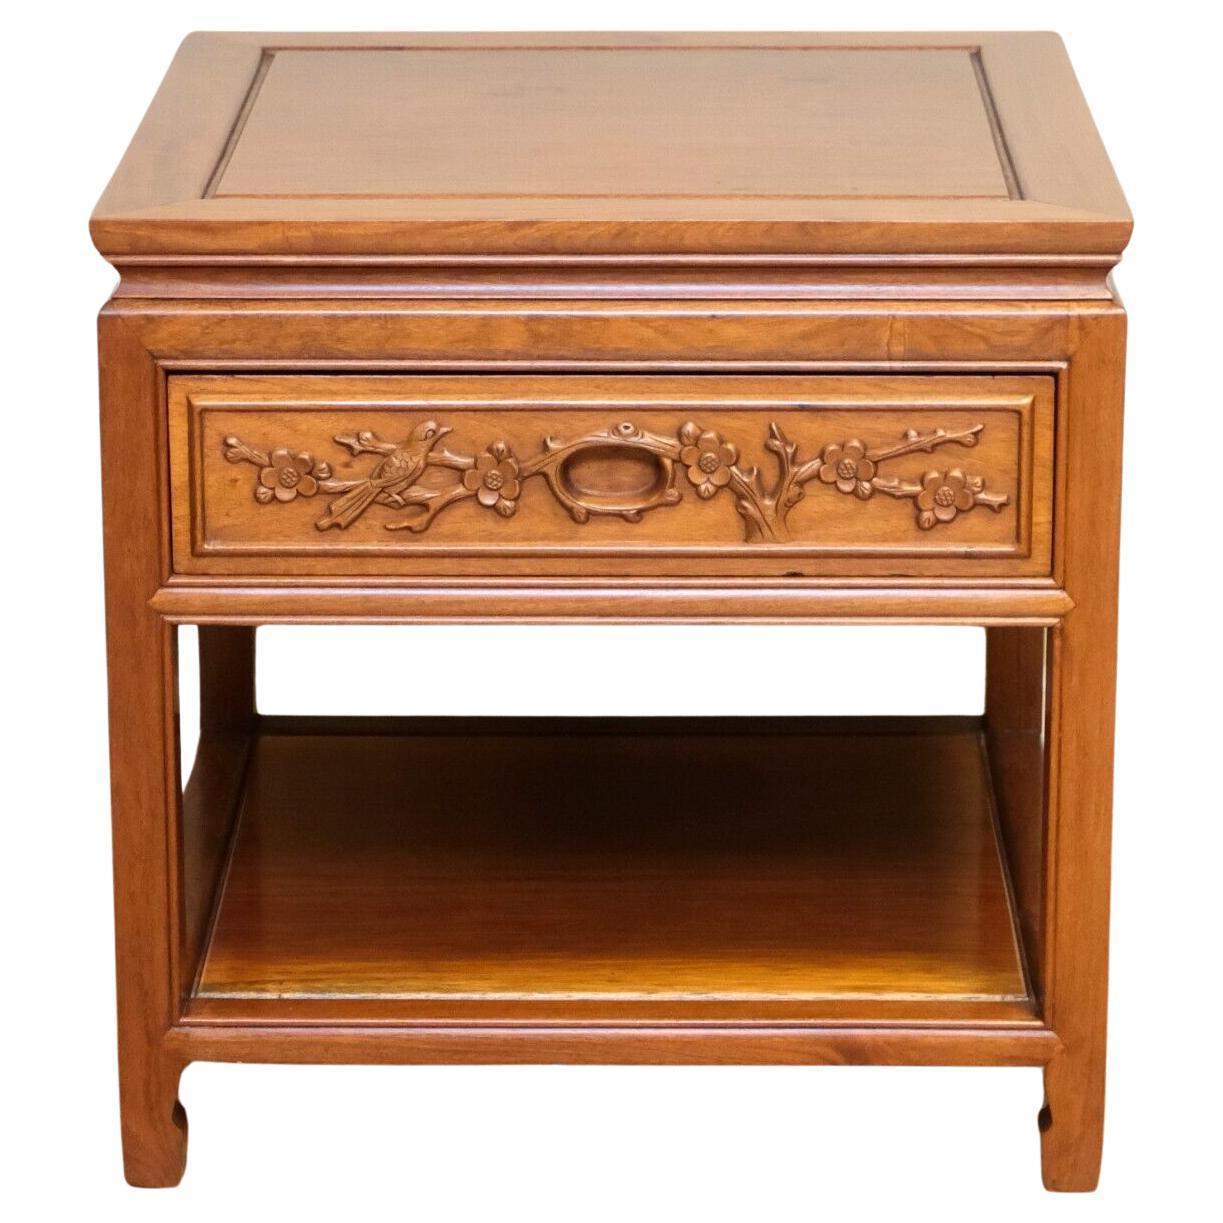 VINTAGE CHINESE HARDWOOD SiDE TABLE WITH DECORATIVE SINGLE DRAWER & SHELF For Sale